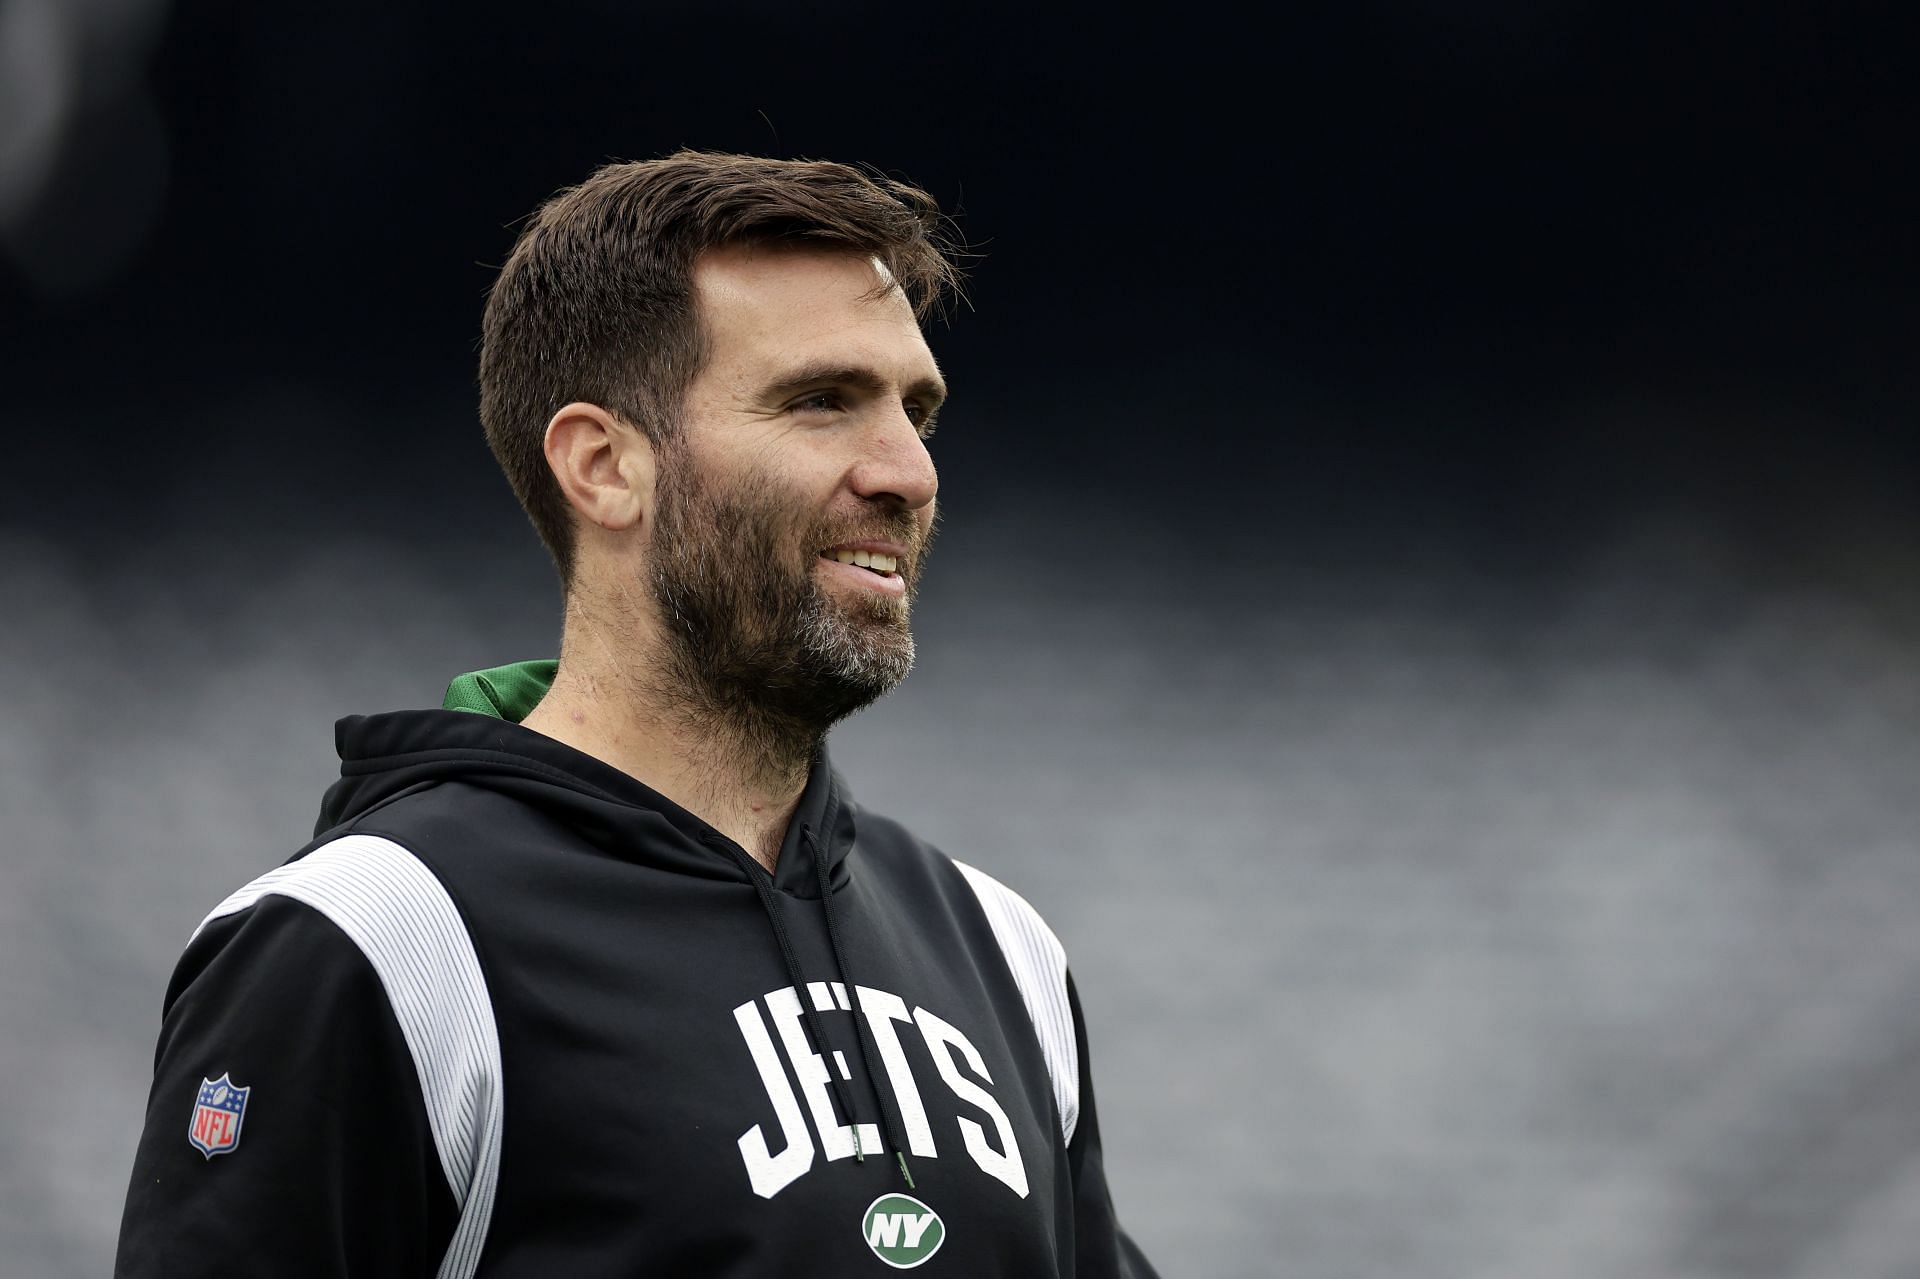 Joe Flacco at with the New York Jets